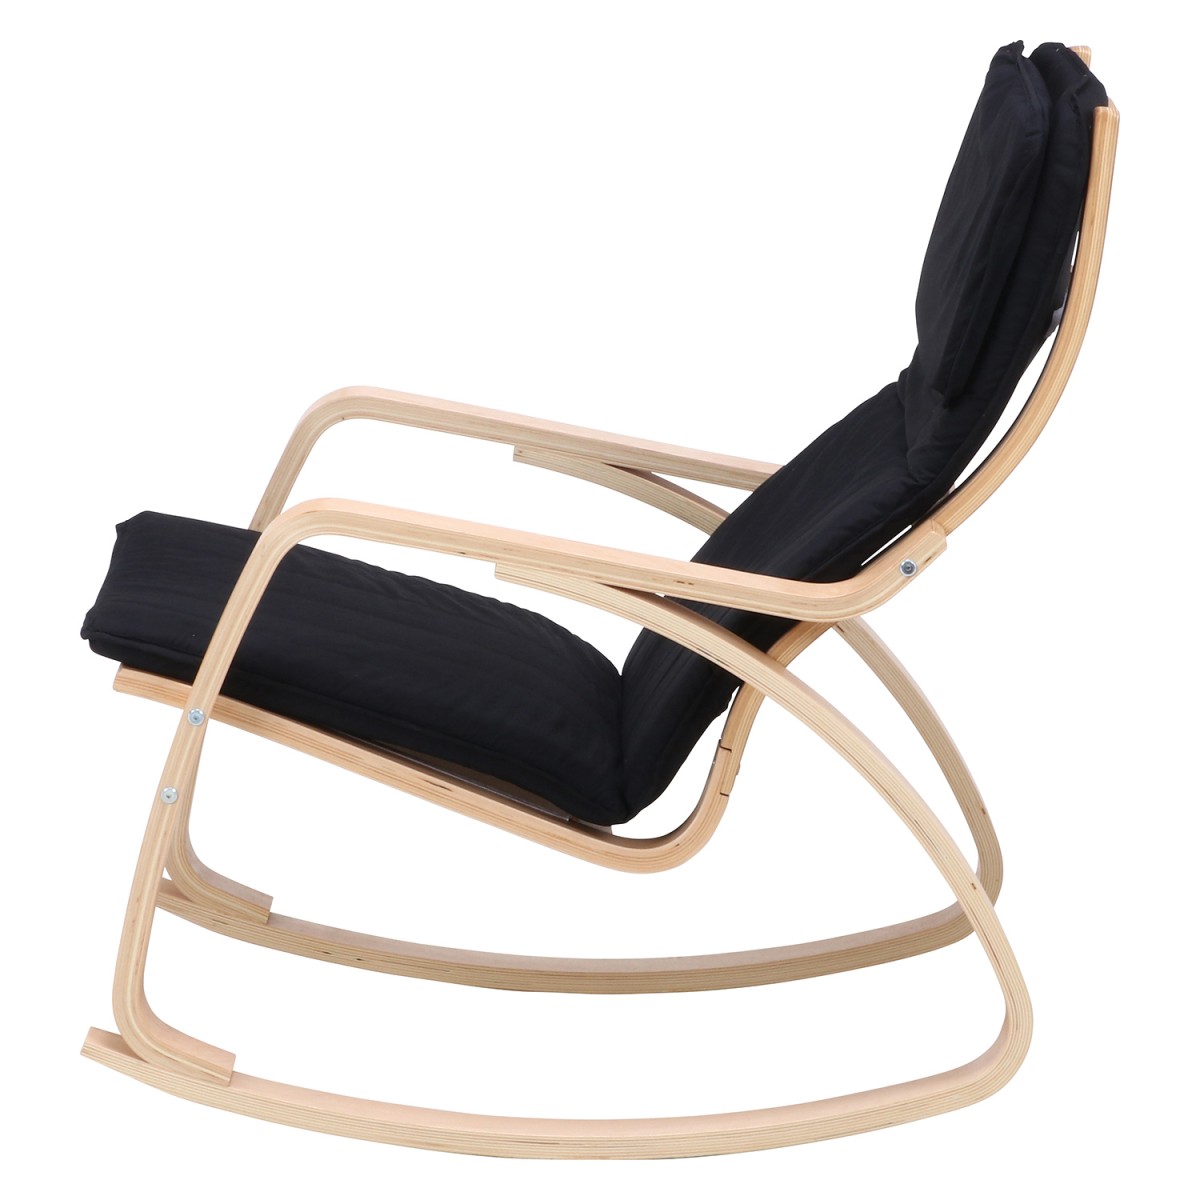  rocking chair relax chair wooden stylish Northern Europe high back rocking chair - swaying chair 